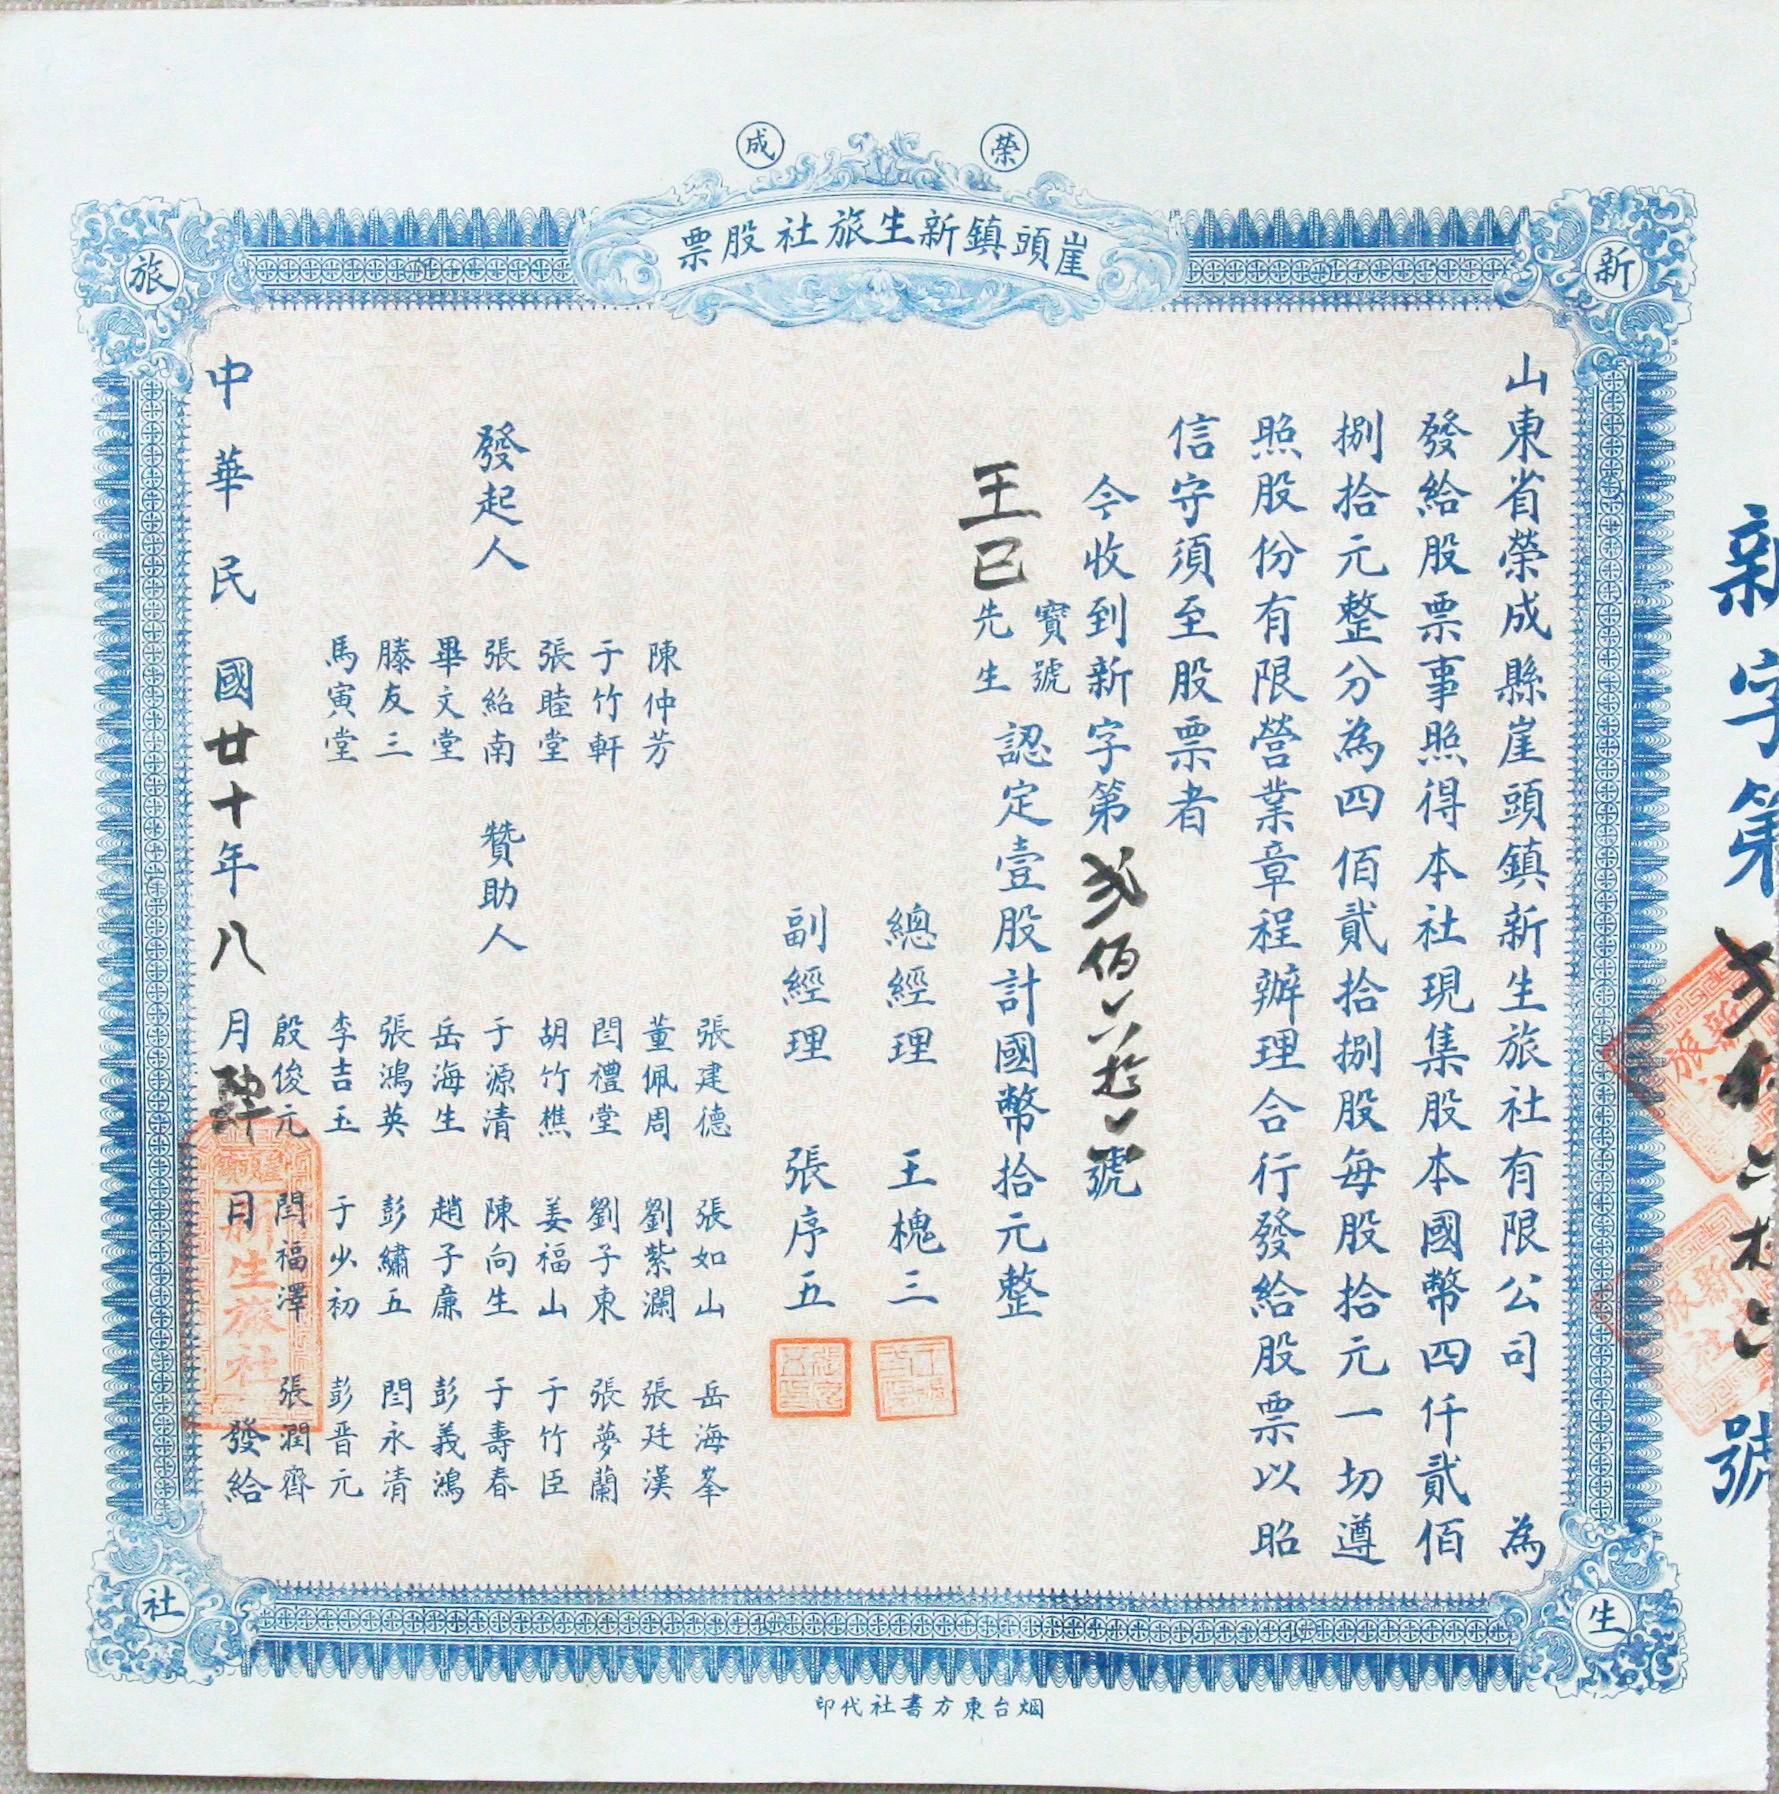 S0169, Yatou Hotel Company, Stock Certificate of 1 Share, China 1931